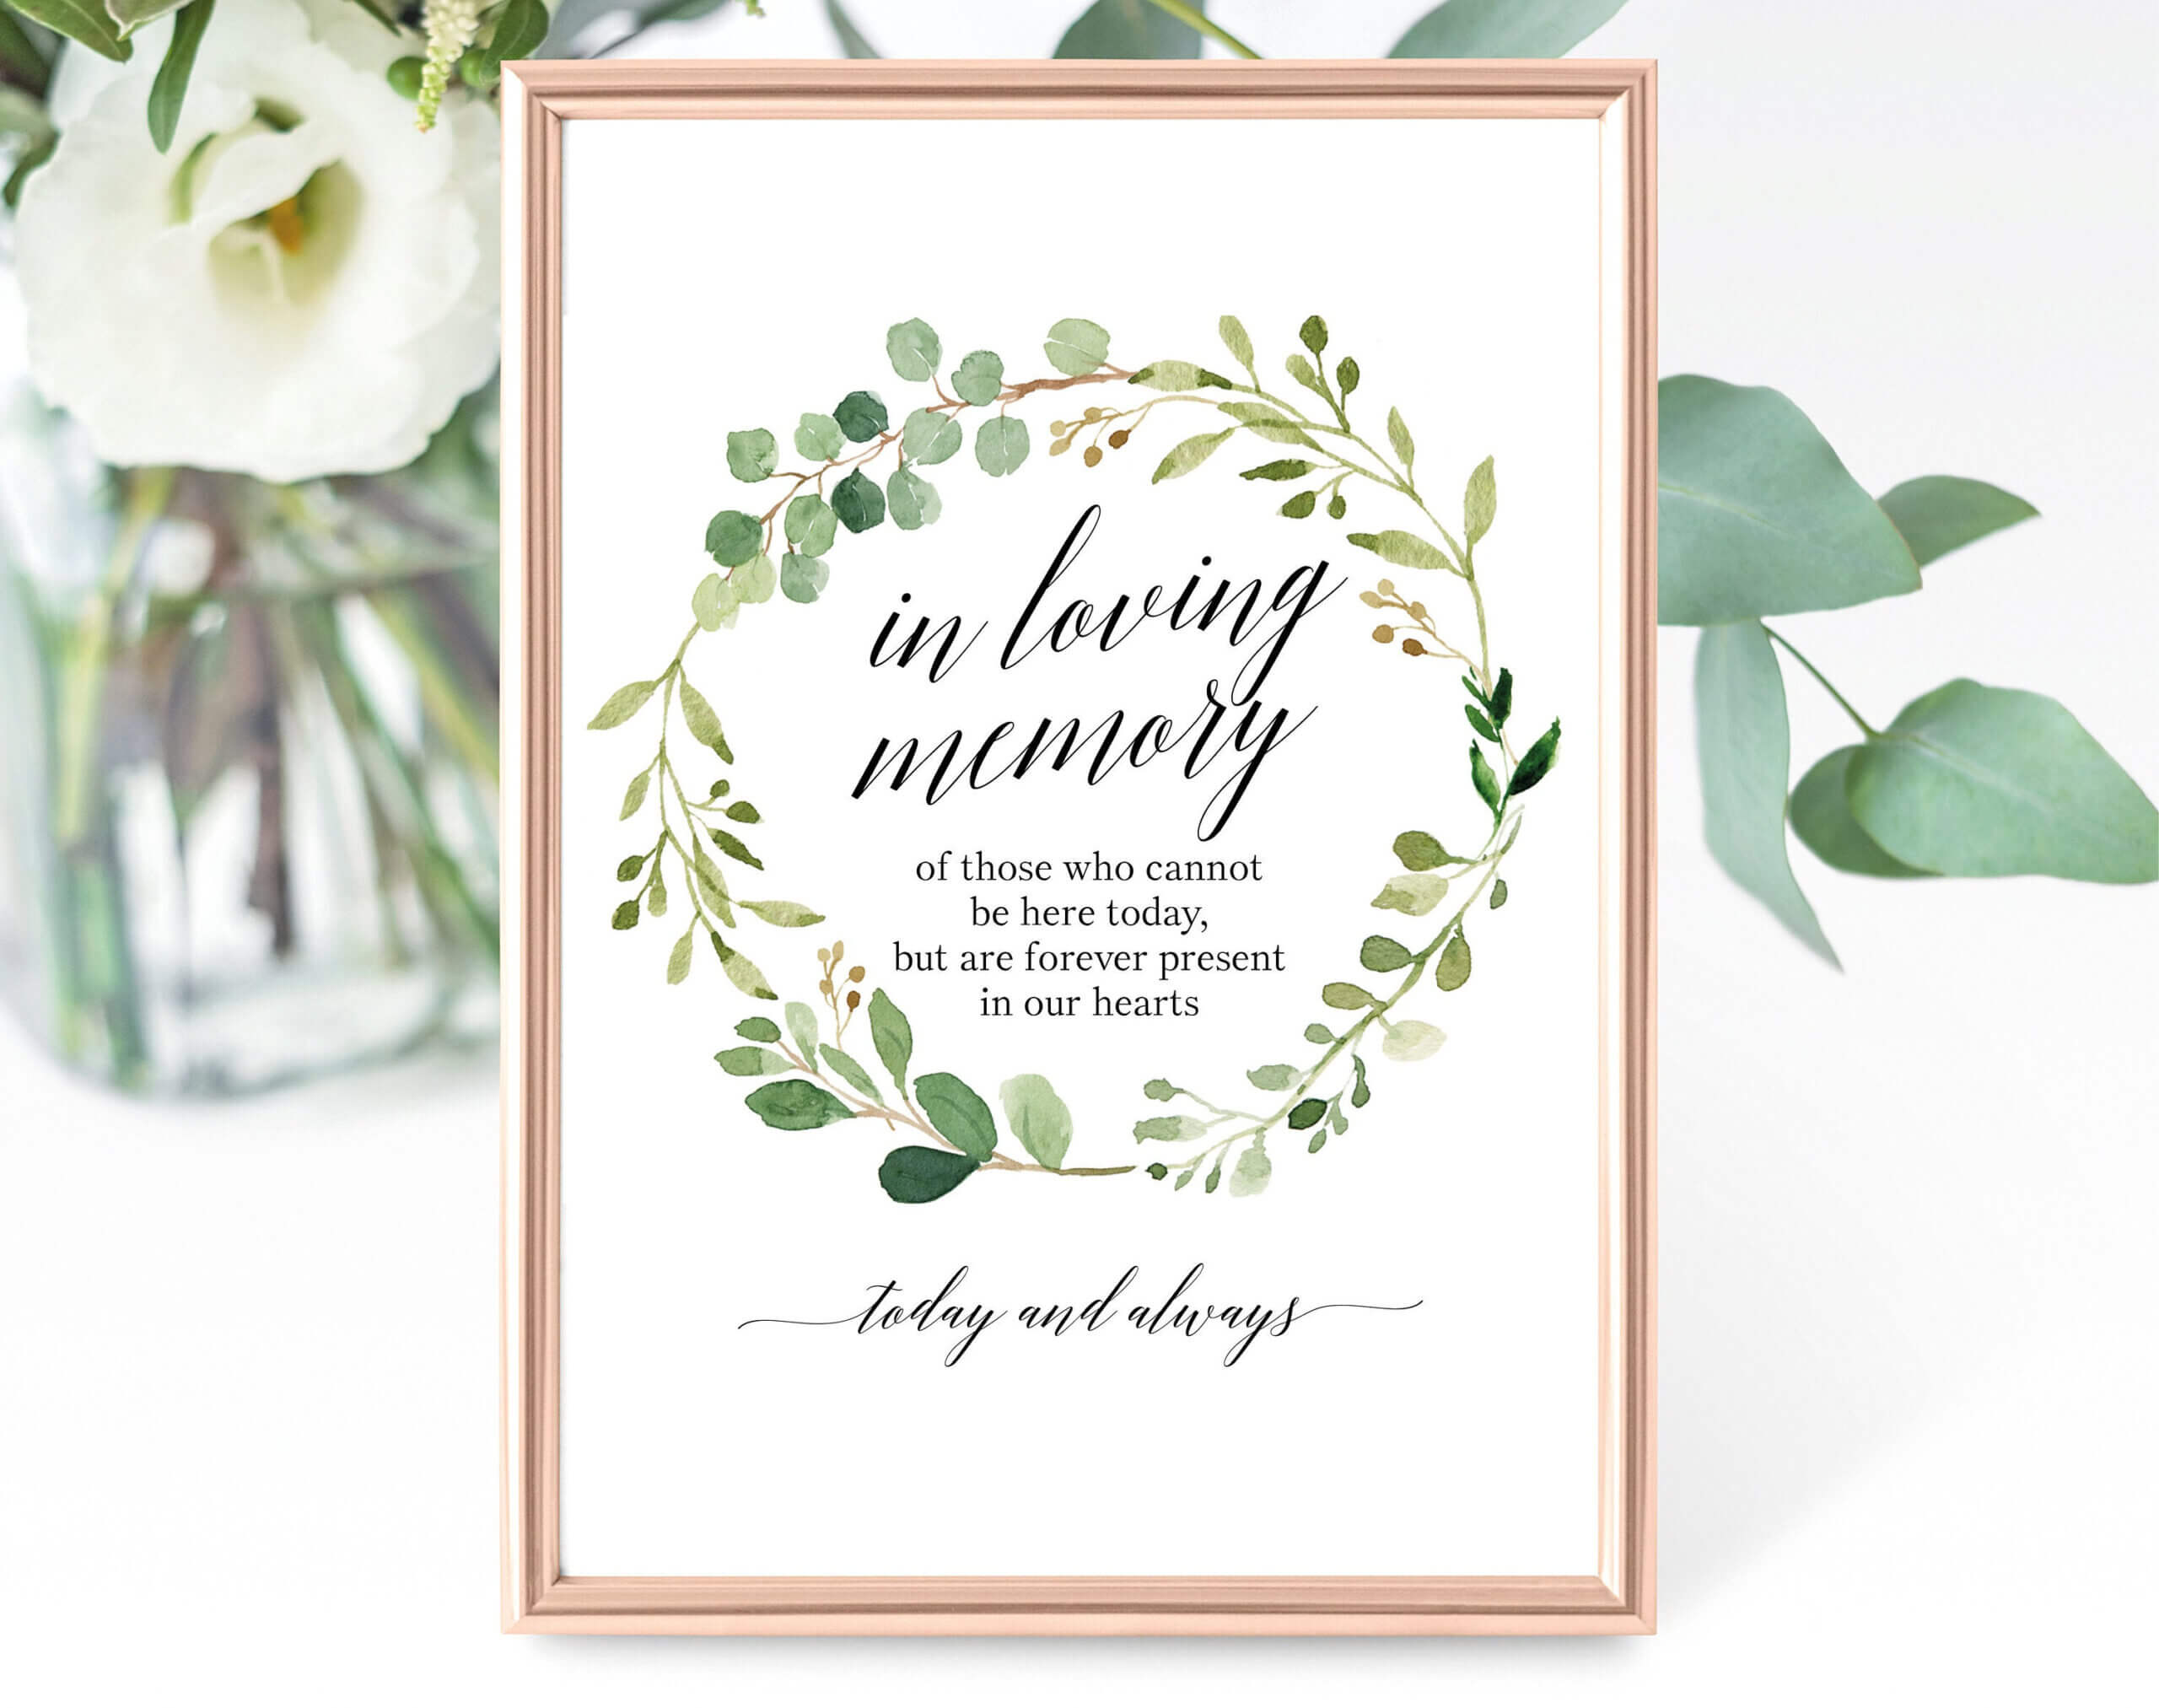 031 Template Ideas In Loving Memory Free Cards Awesome Pertaining To Sympathy Card Template